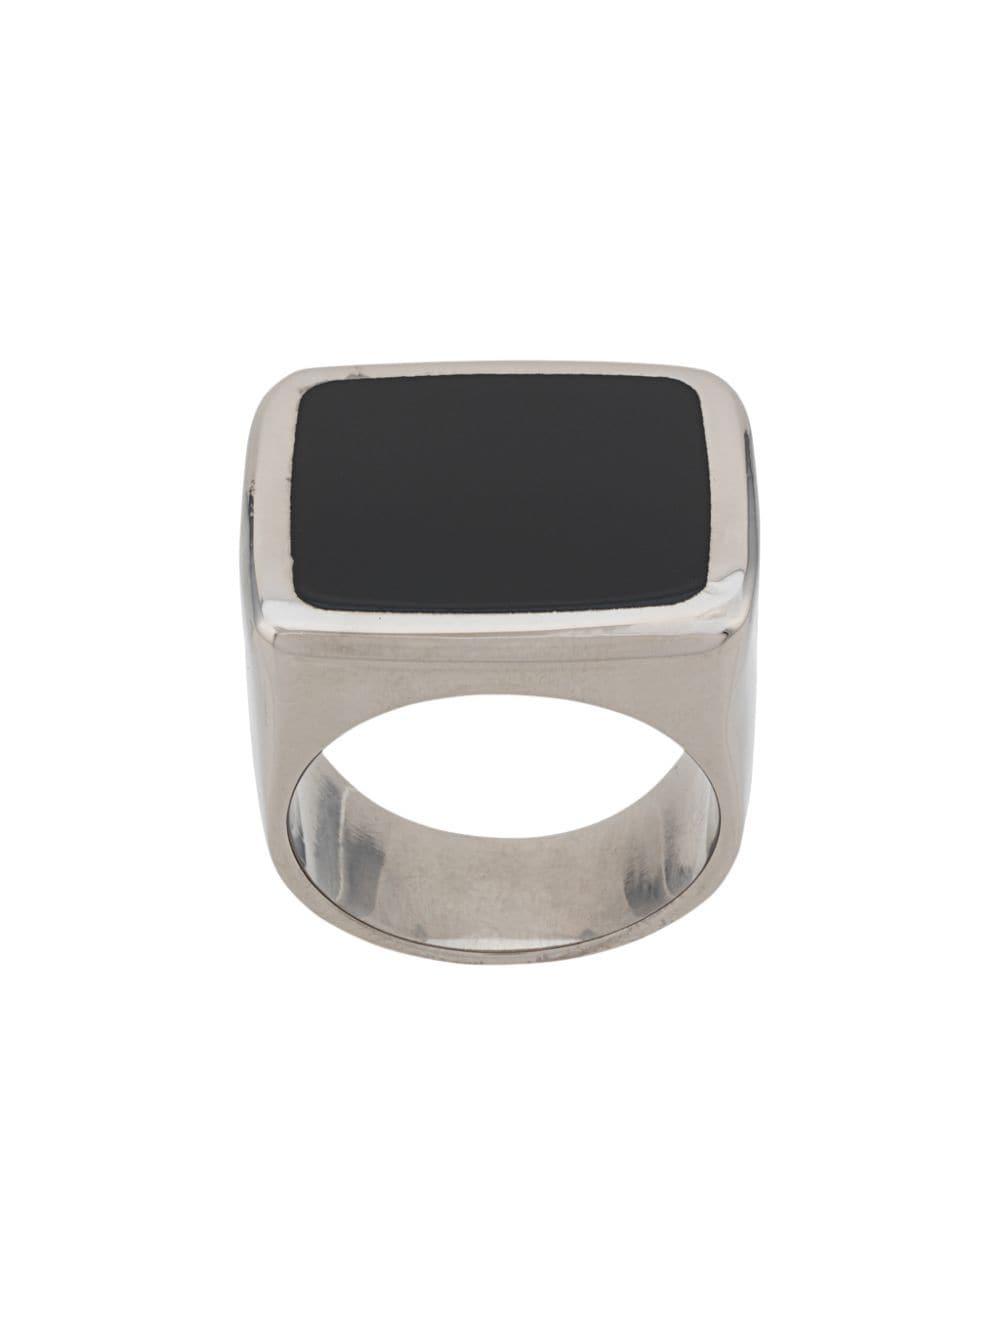 Givenchy Square Signet Ring in Black for Men - Lyst